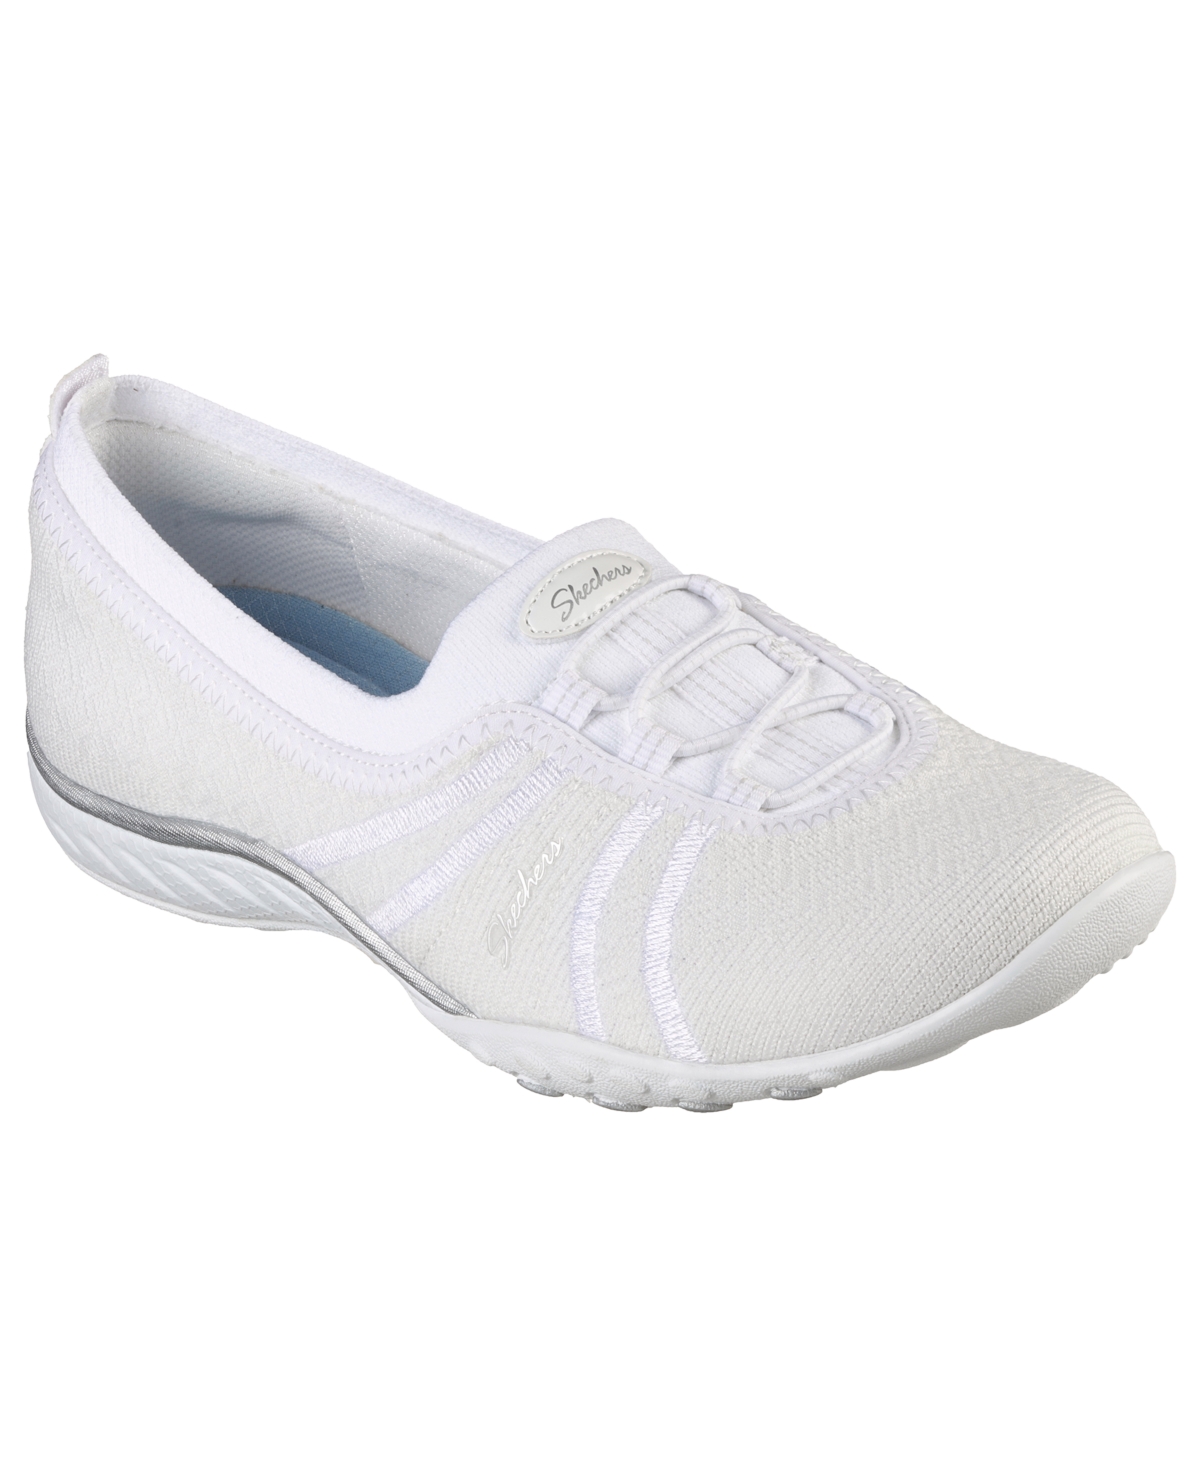 Women's Active- Breathe-Easy Walking Sneakers from Finish Line - White